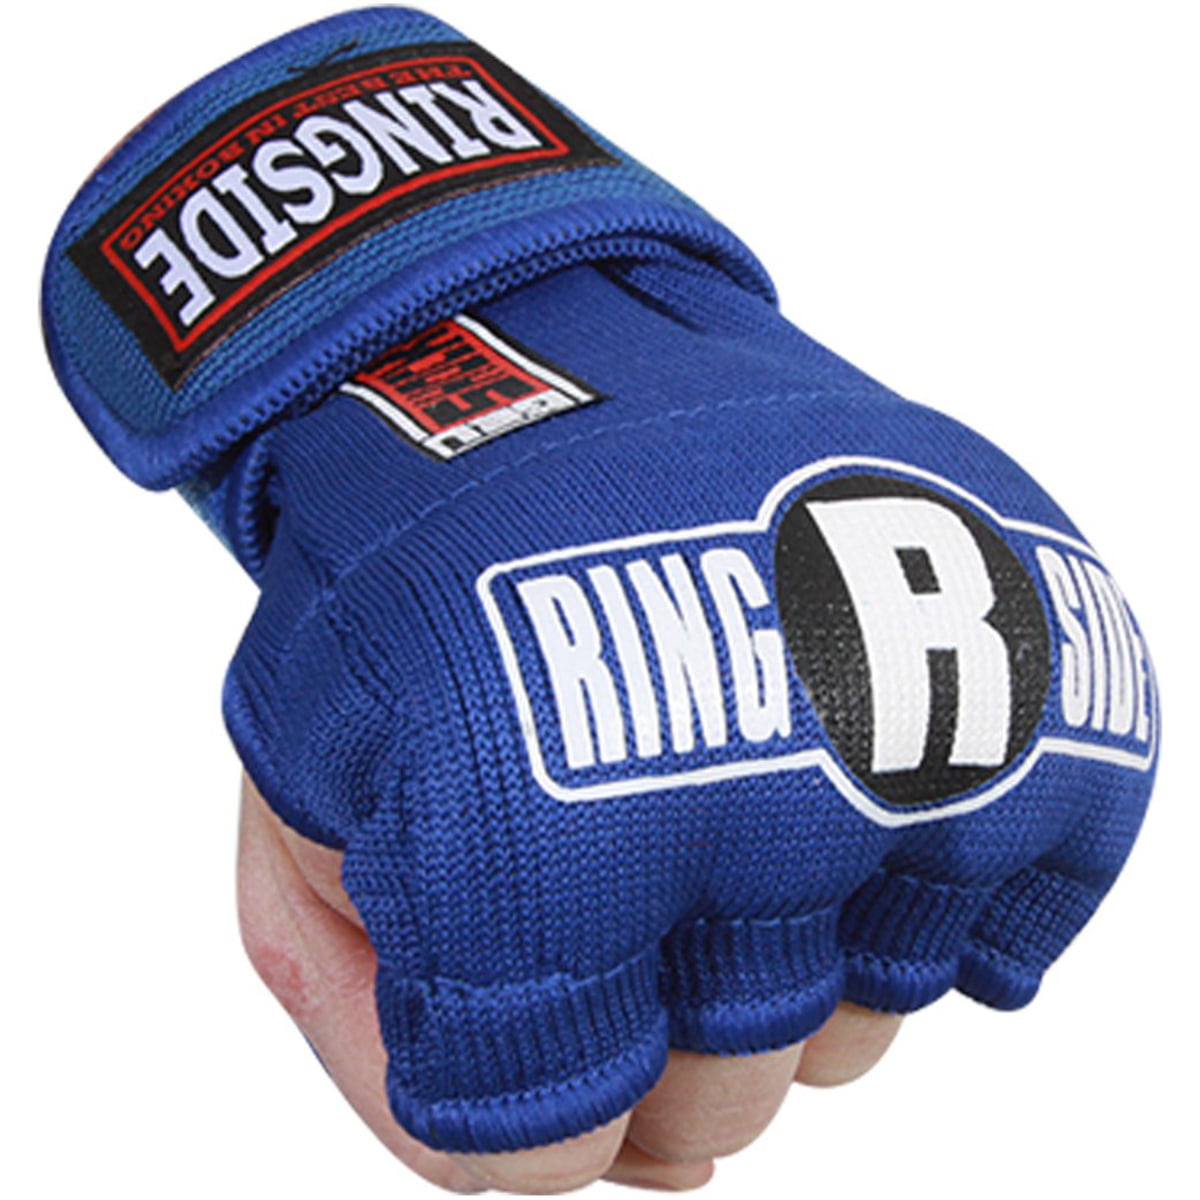 Ringside Quick Wrap Gel Shock MMA Boxing Hand Wraps